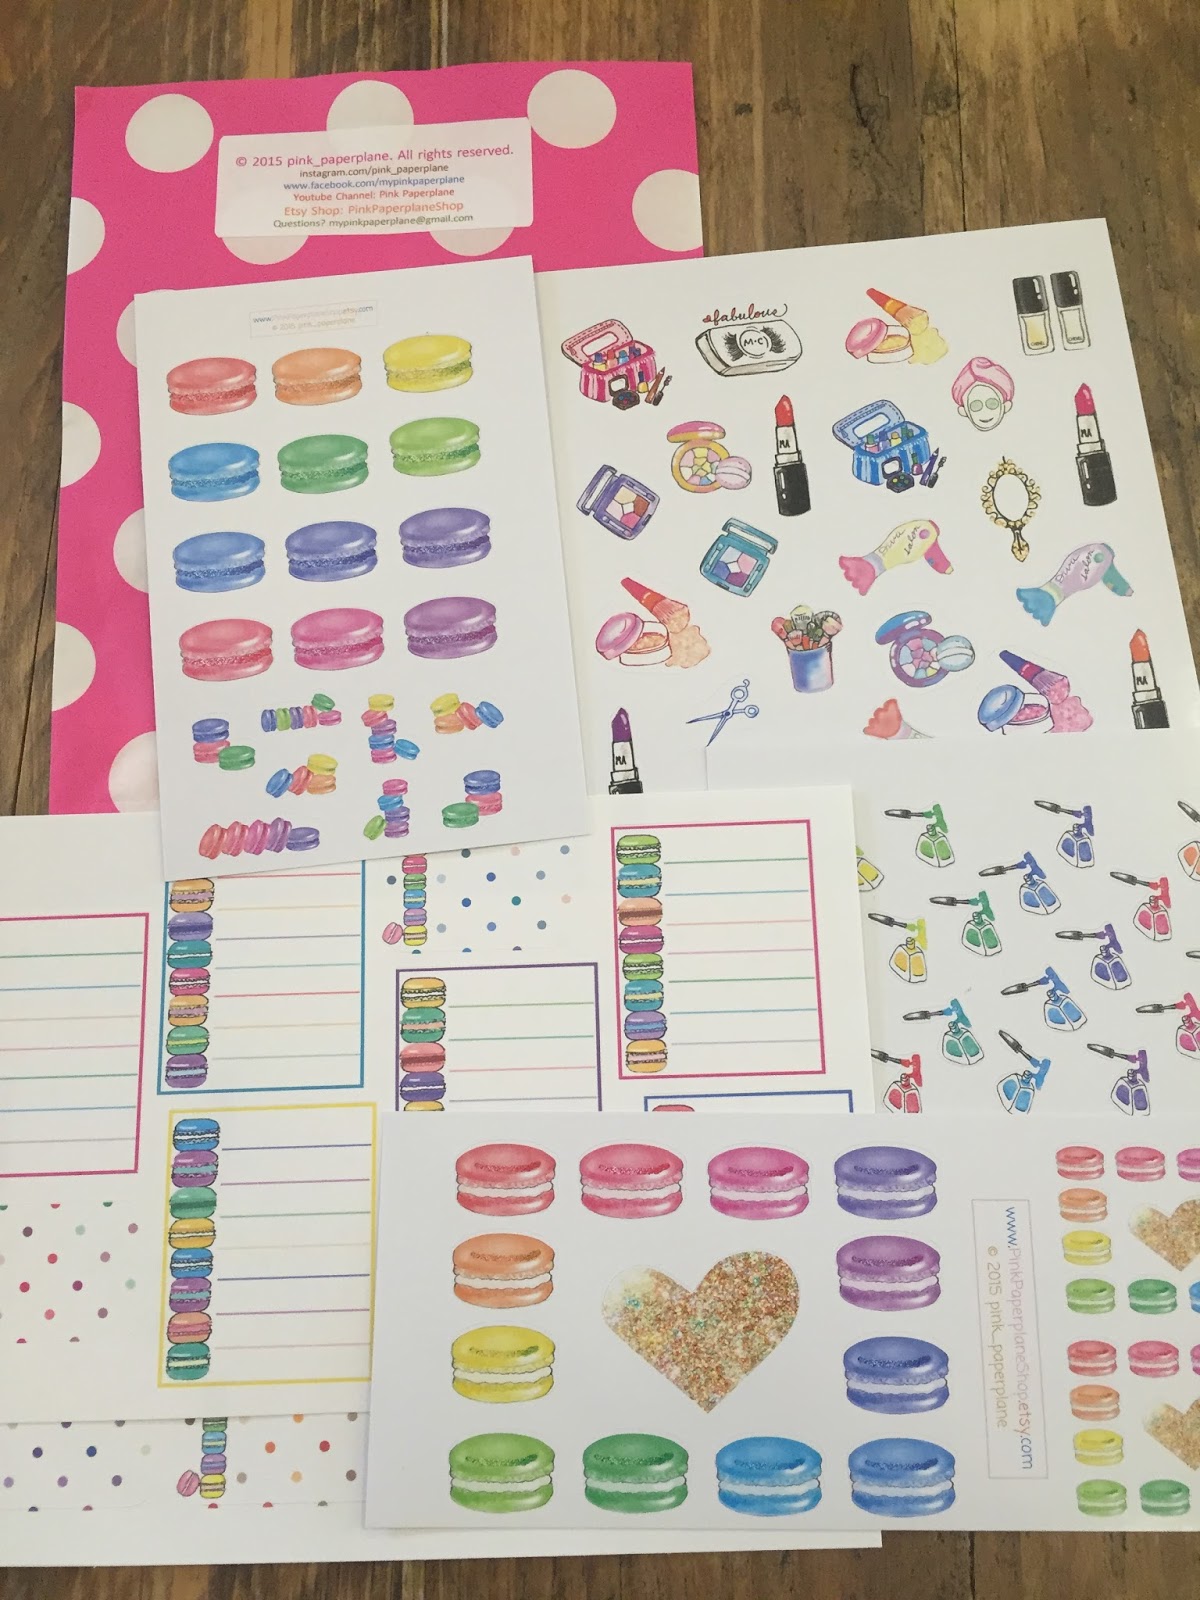 Etsy Stickers Haul part 1 (and shipping to UK experience)